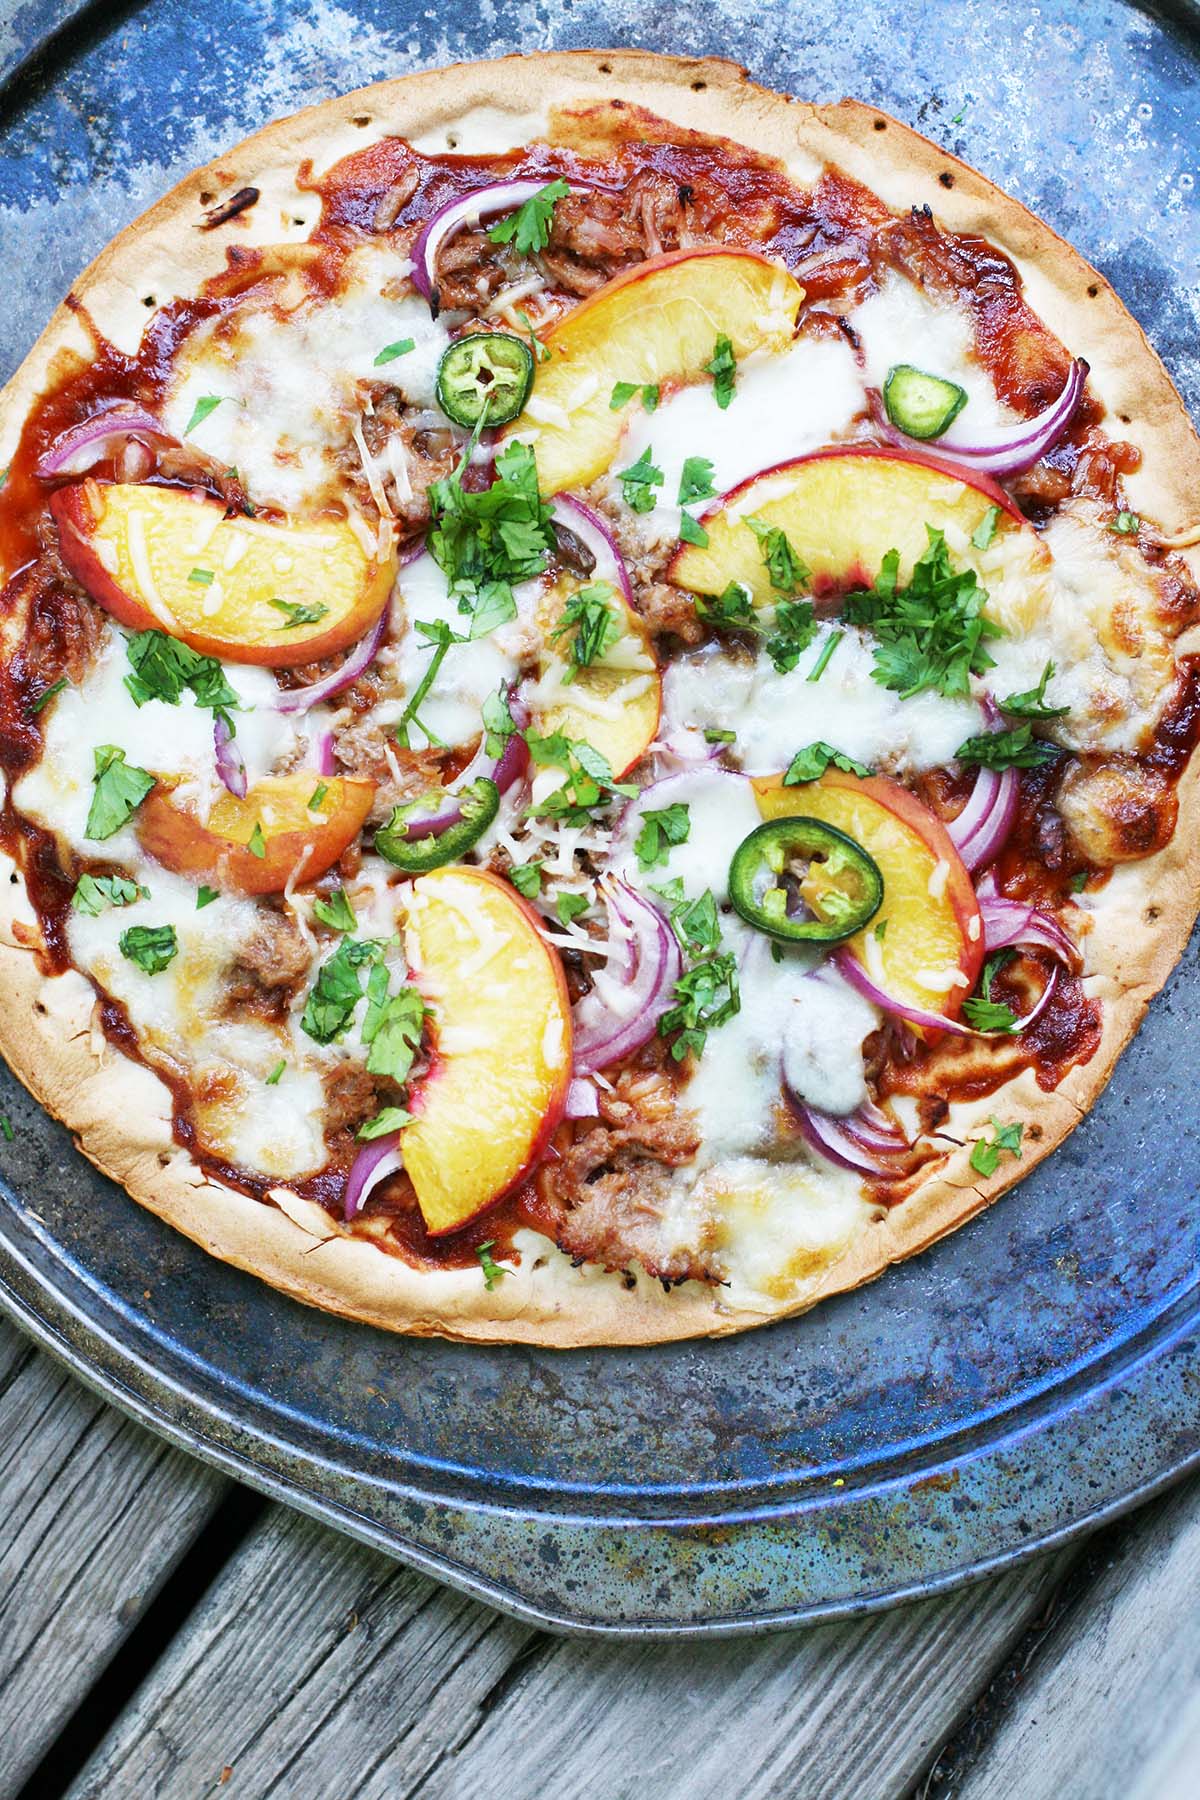 Fruit on pizza: Try this peach, pulled pork, jalapeno, and red onion pizza!